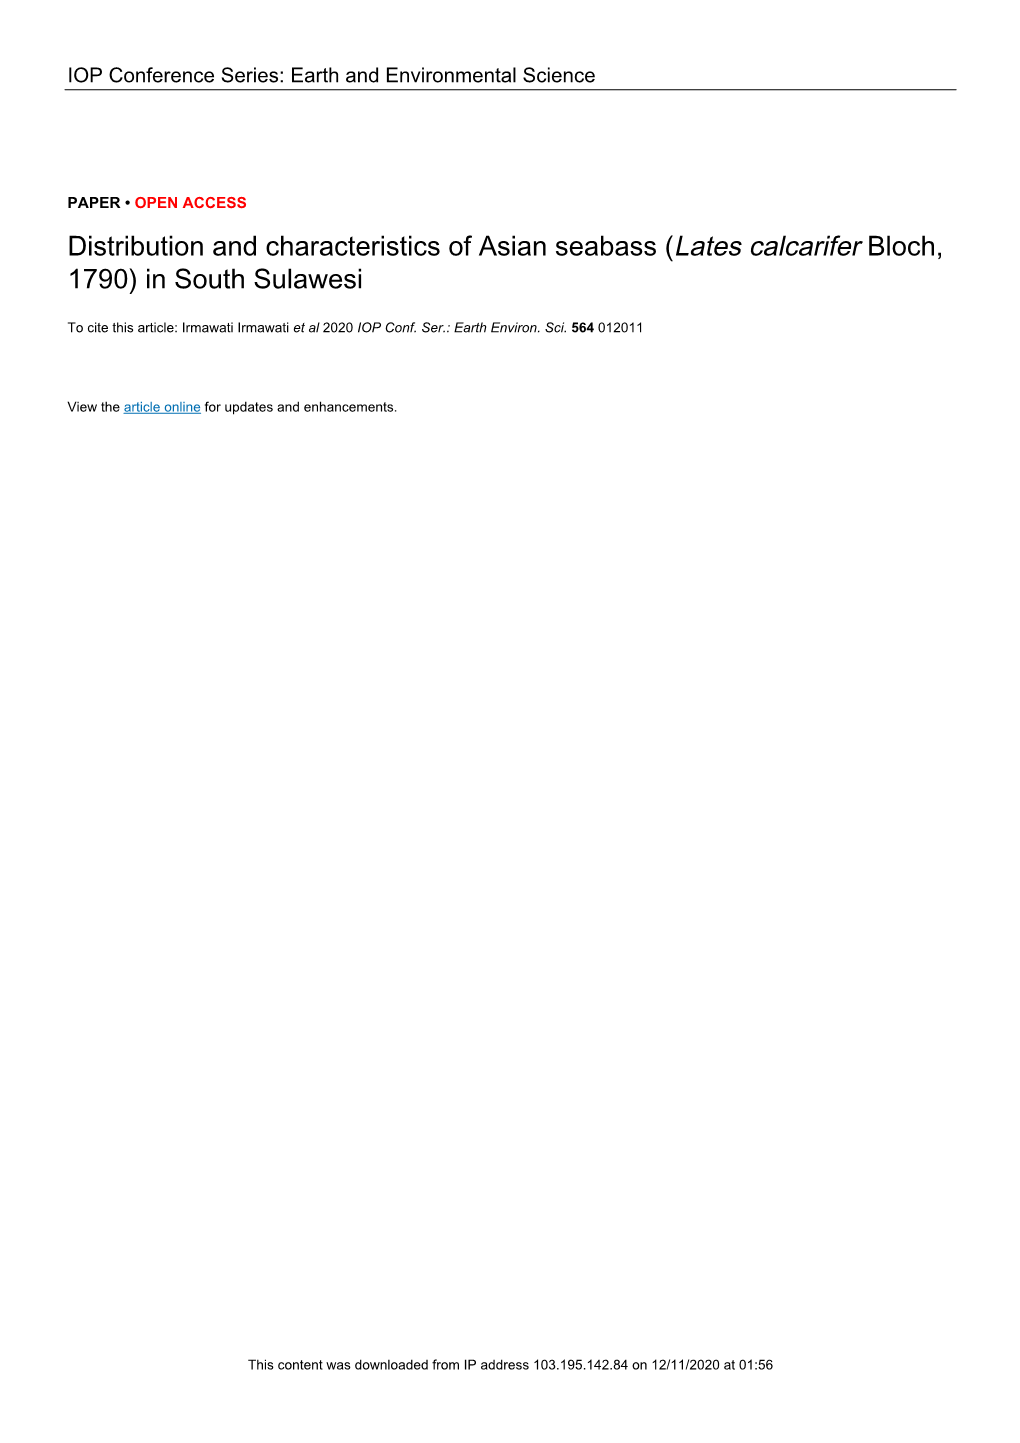 Distribution and Characteristics of Asian Seabass (Lates Calcarifer Bloch, 1790) in South Sulawesi